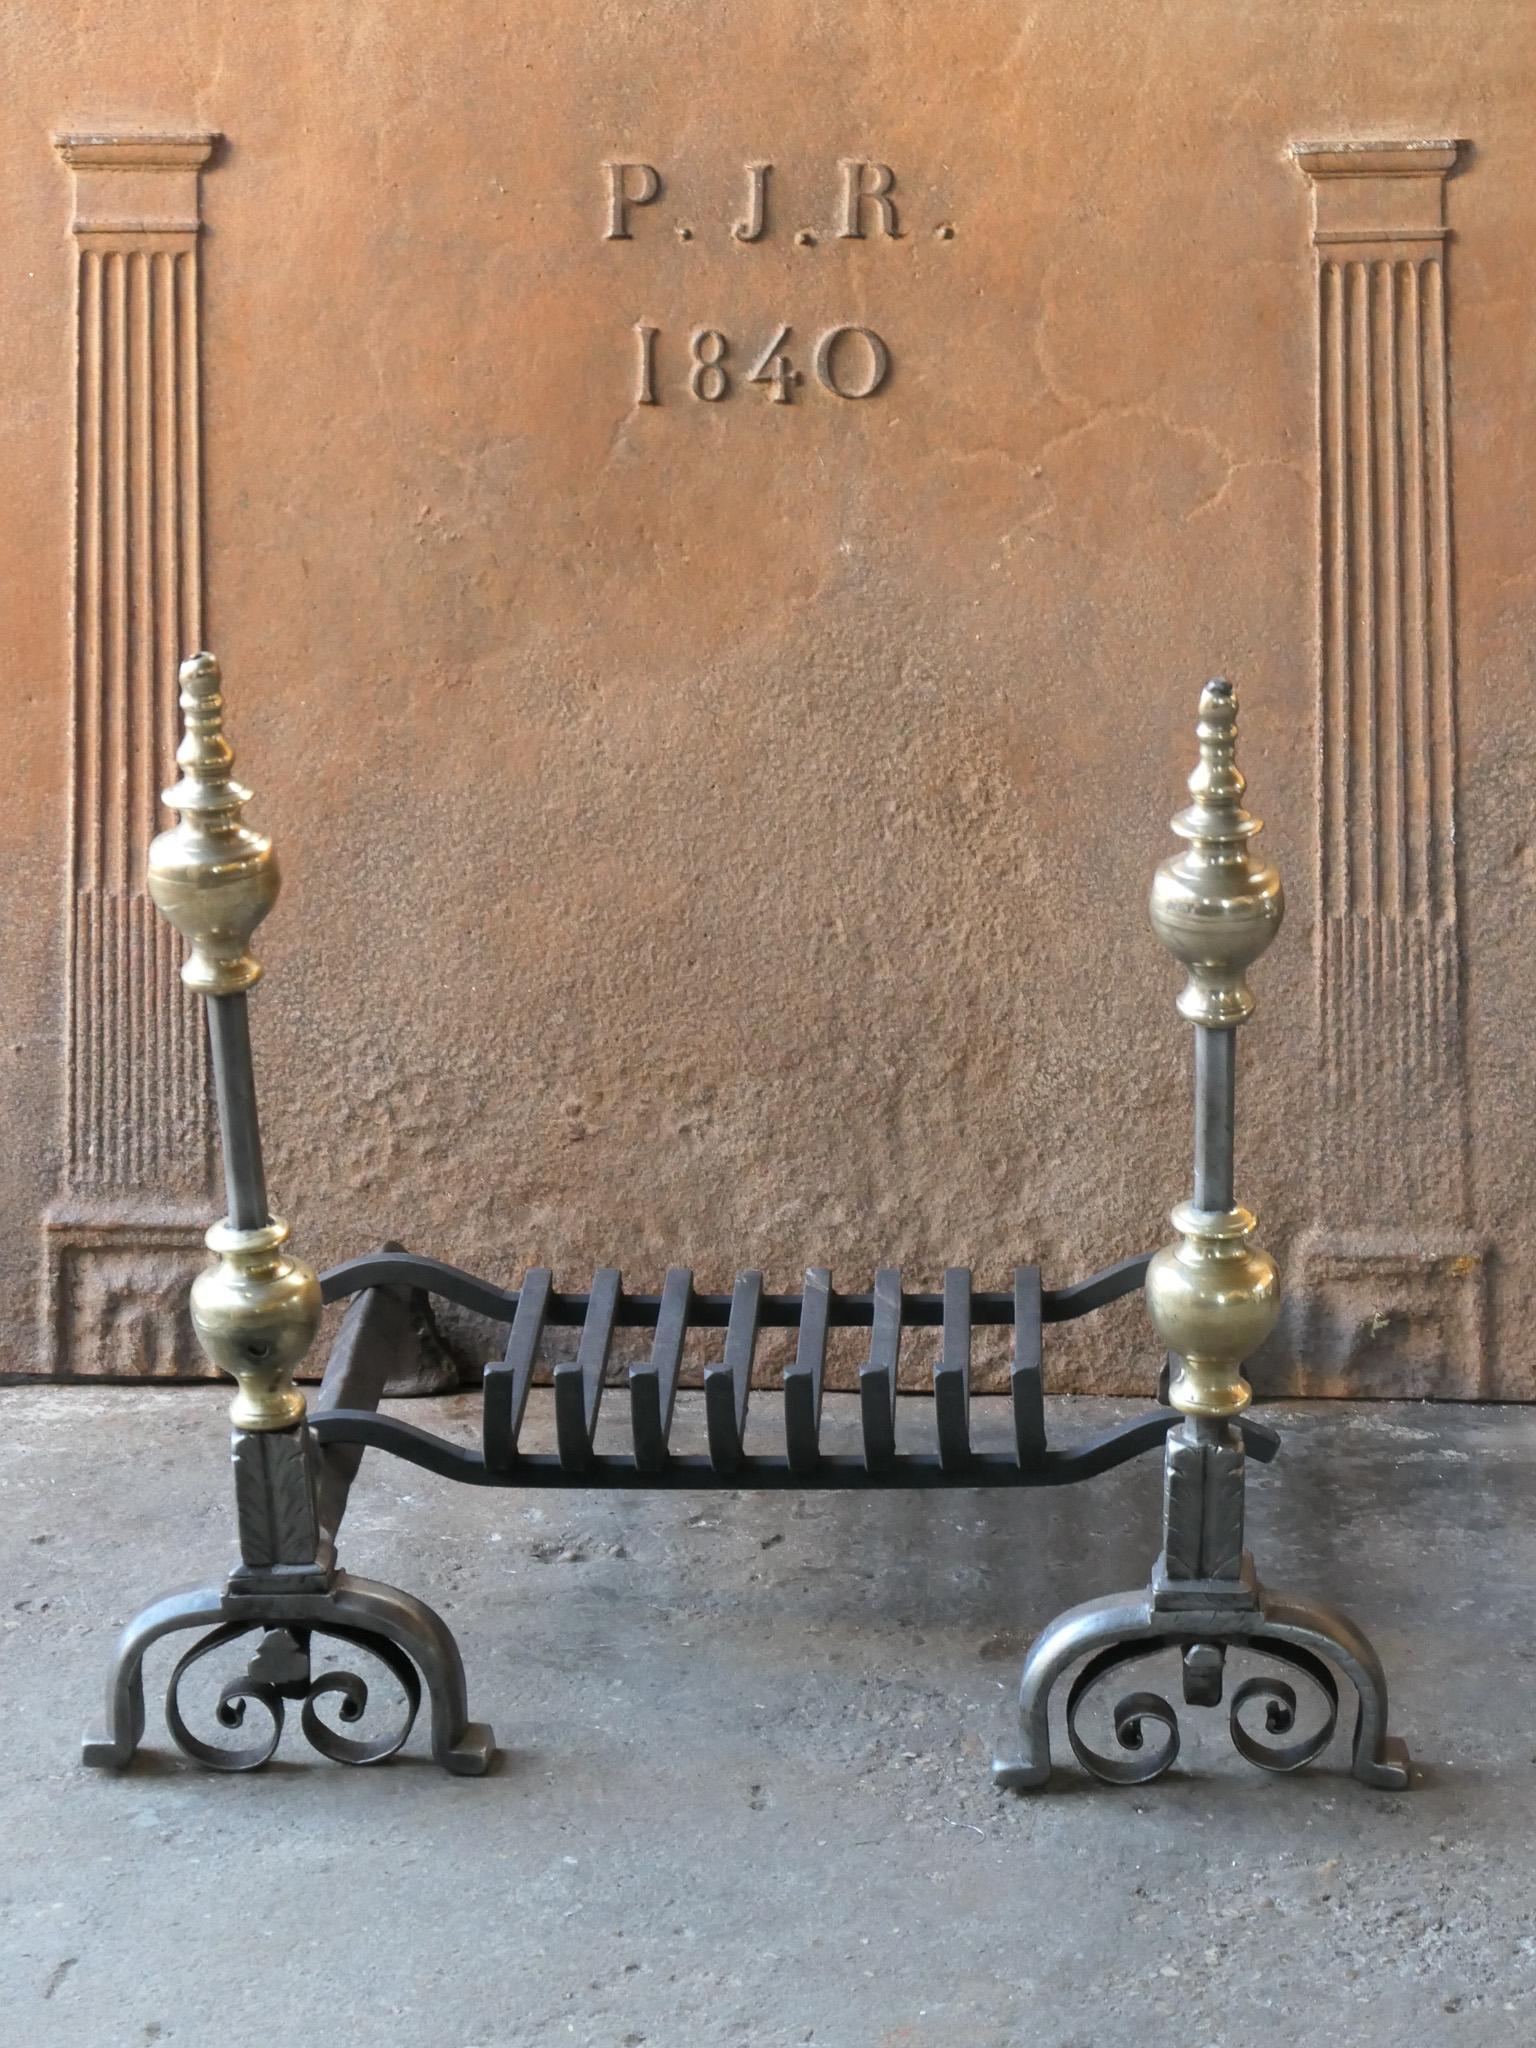 18th century French Louis XV fireplace grate, made of wrought iron and bronze. The basket is in a good condition and is fully functional. Some minor damages are highlighted in the pictures.

The width at the front is 68.5 cm (27.0 inches)